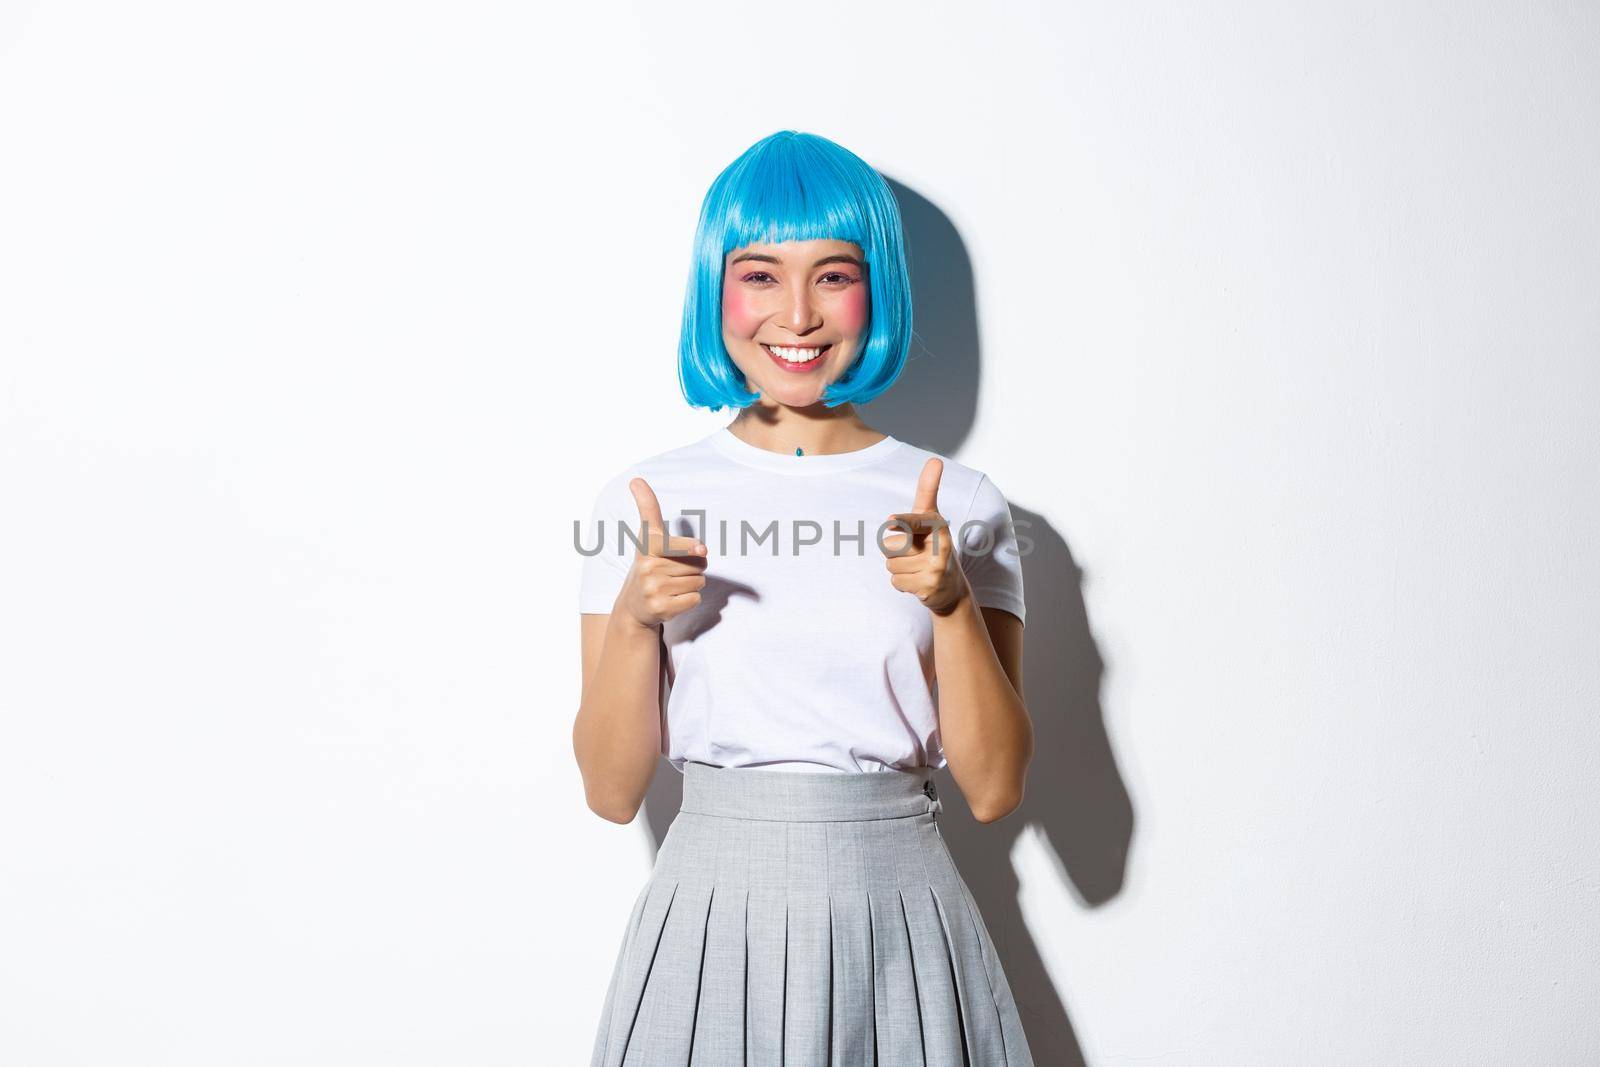 Cheeky japanese girl in blue party wig pointing fingers at camera and smiling, celebrating halloween, standing over white background by Benzoix